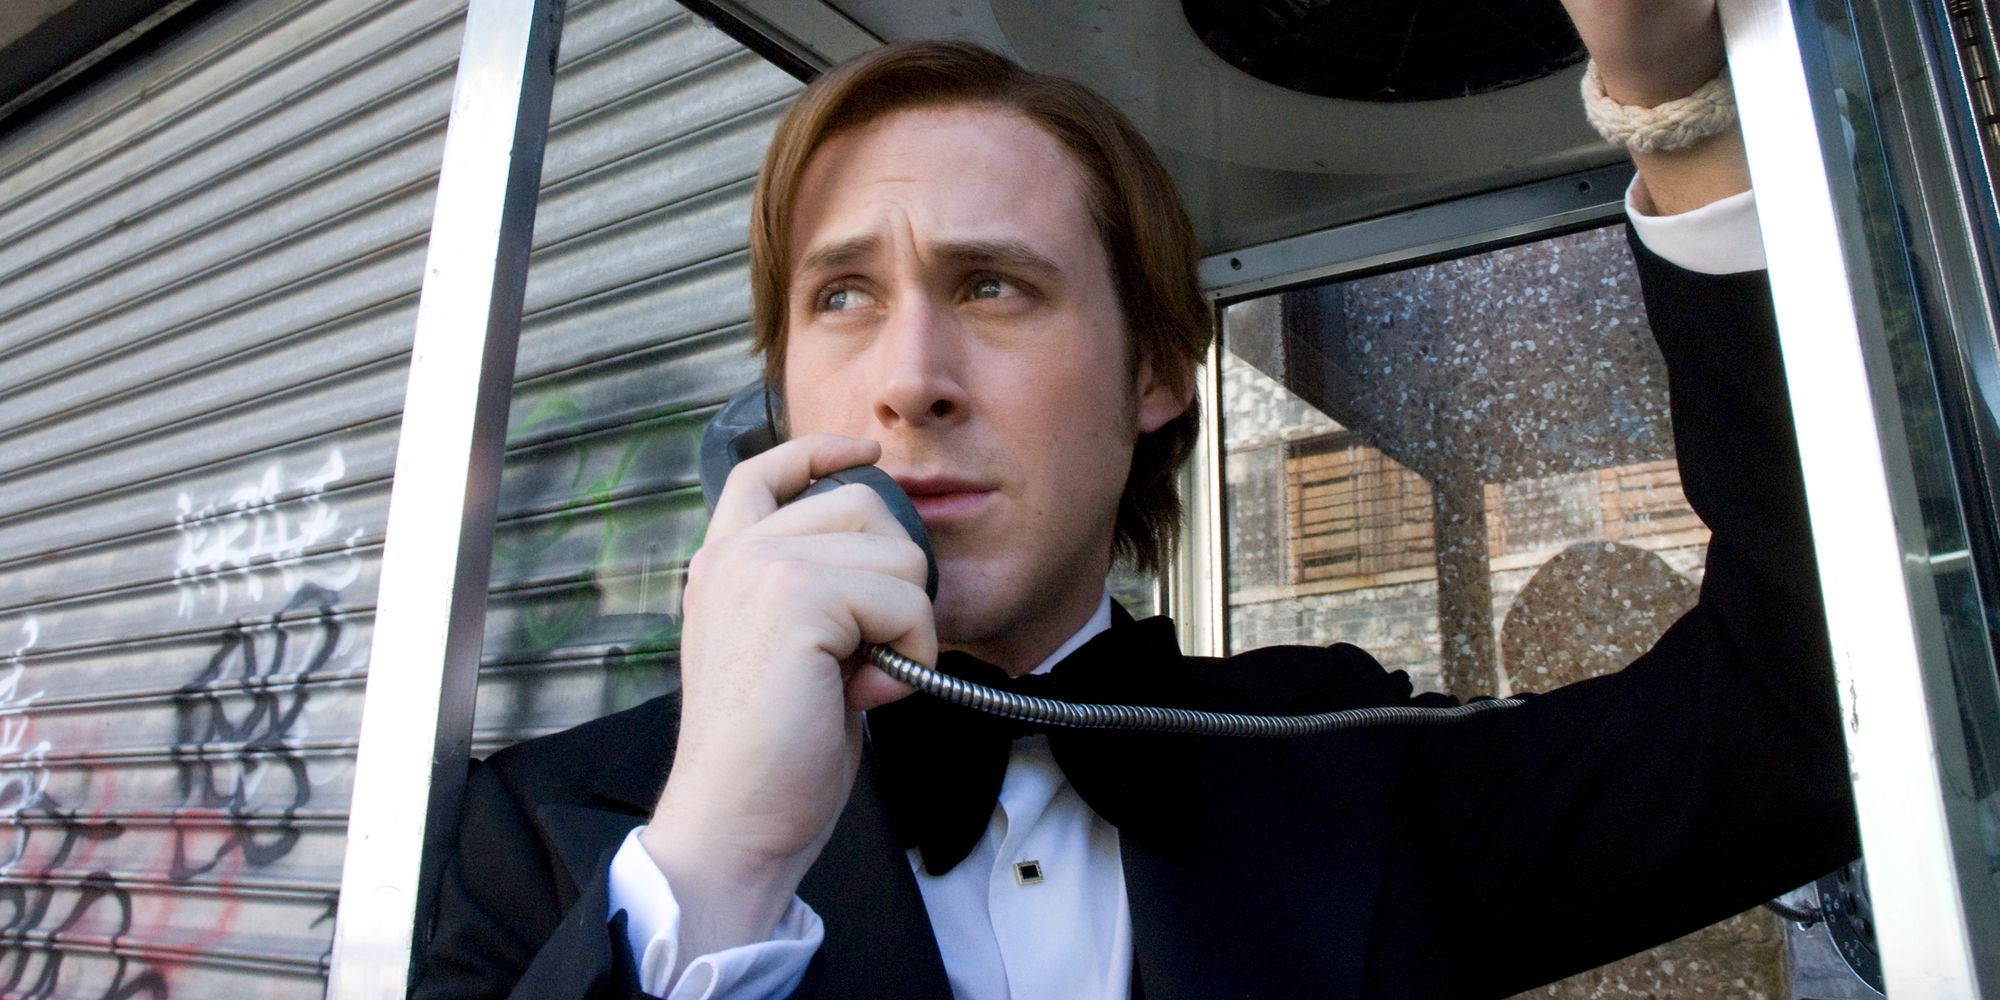 David Marks (Ryan Gosling) wearing a tuxedo and talking on a payphone in All Good Things.